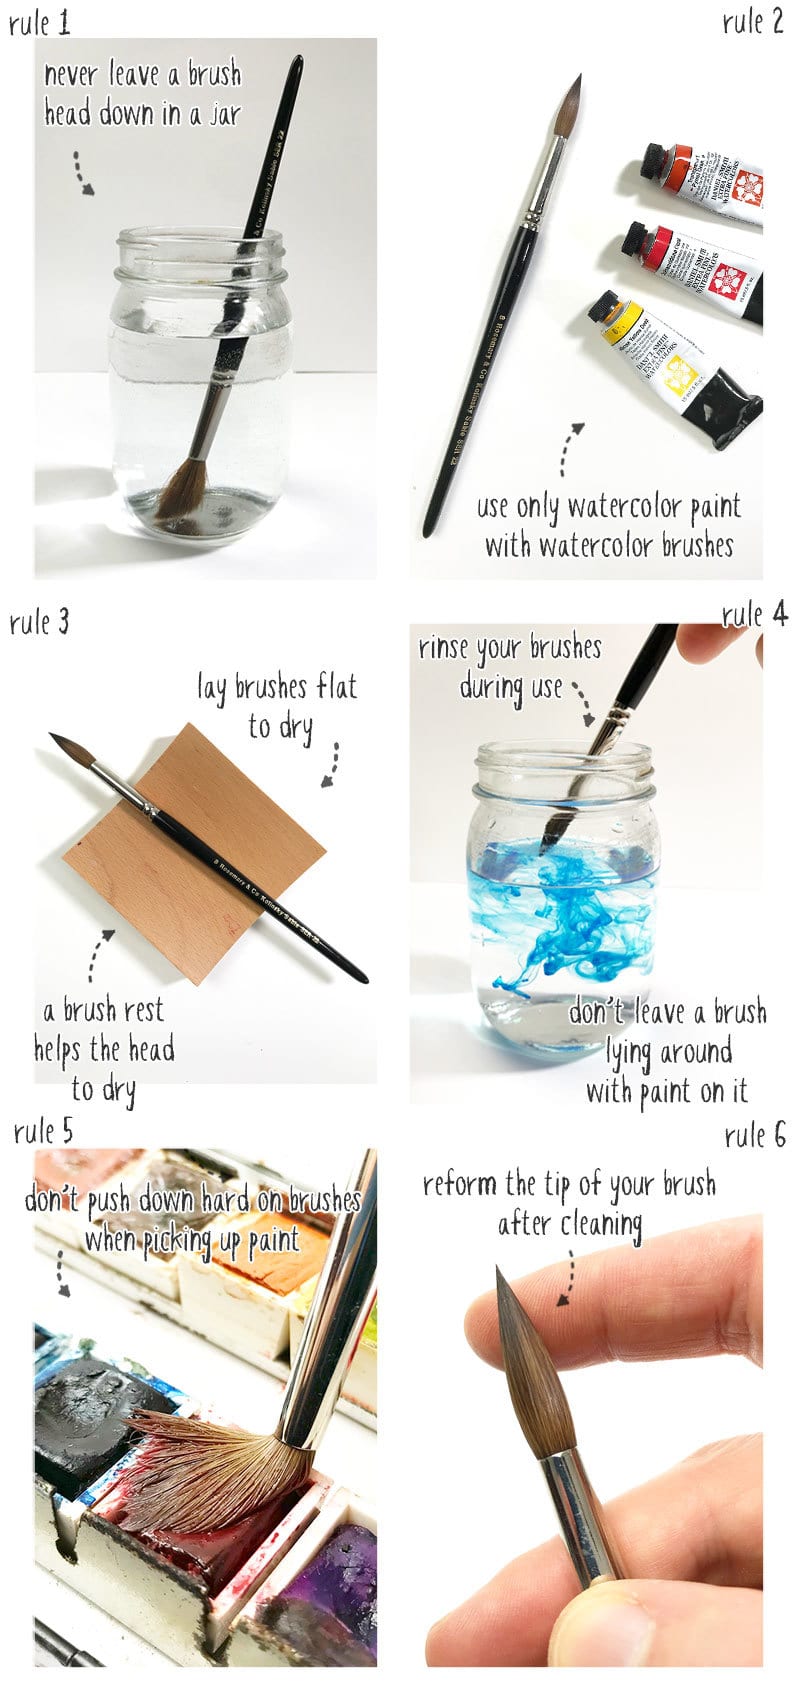 how to care for watercolor brushes step by step guide